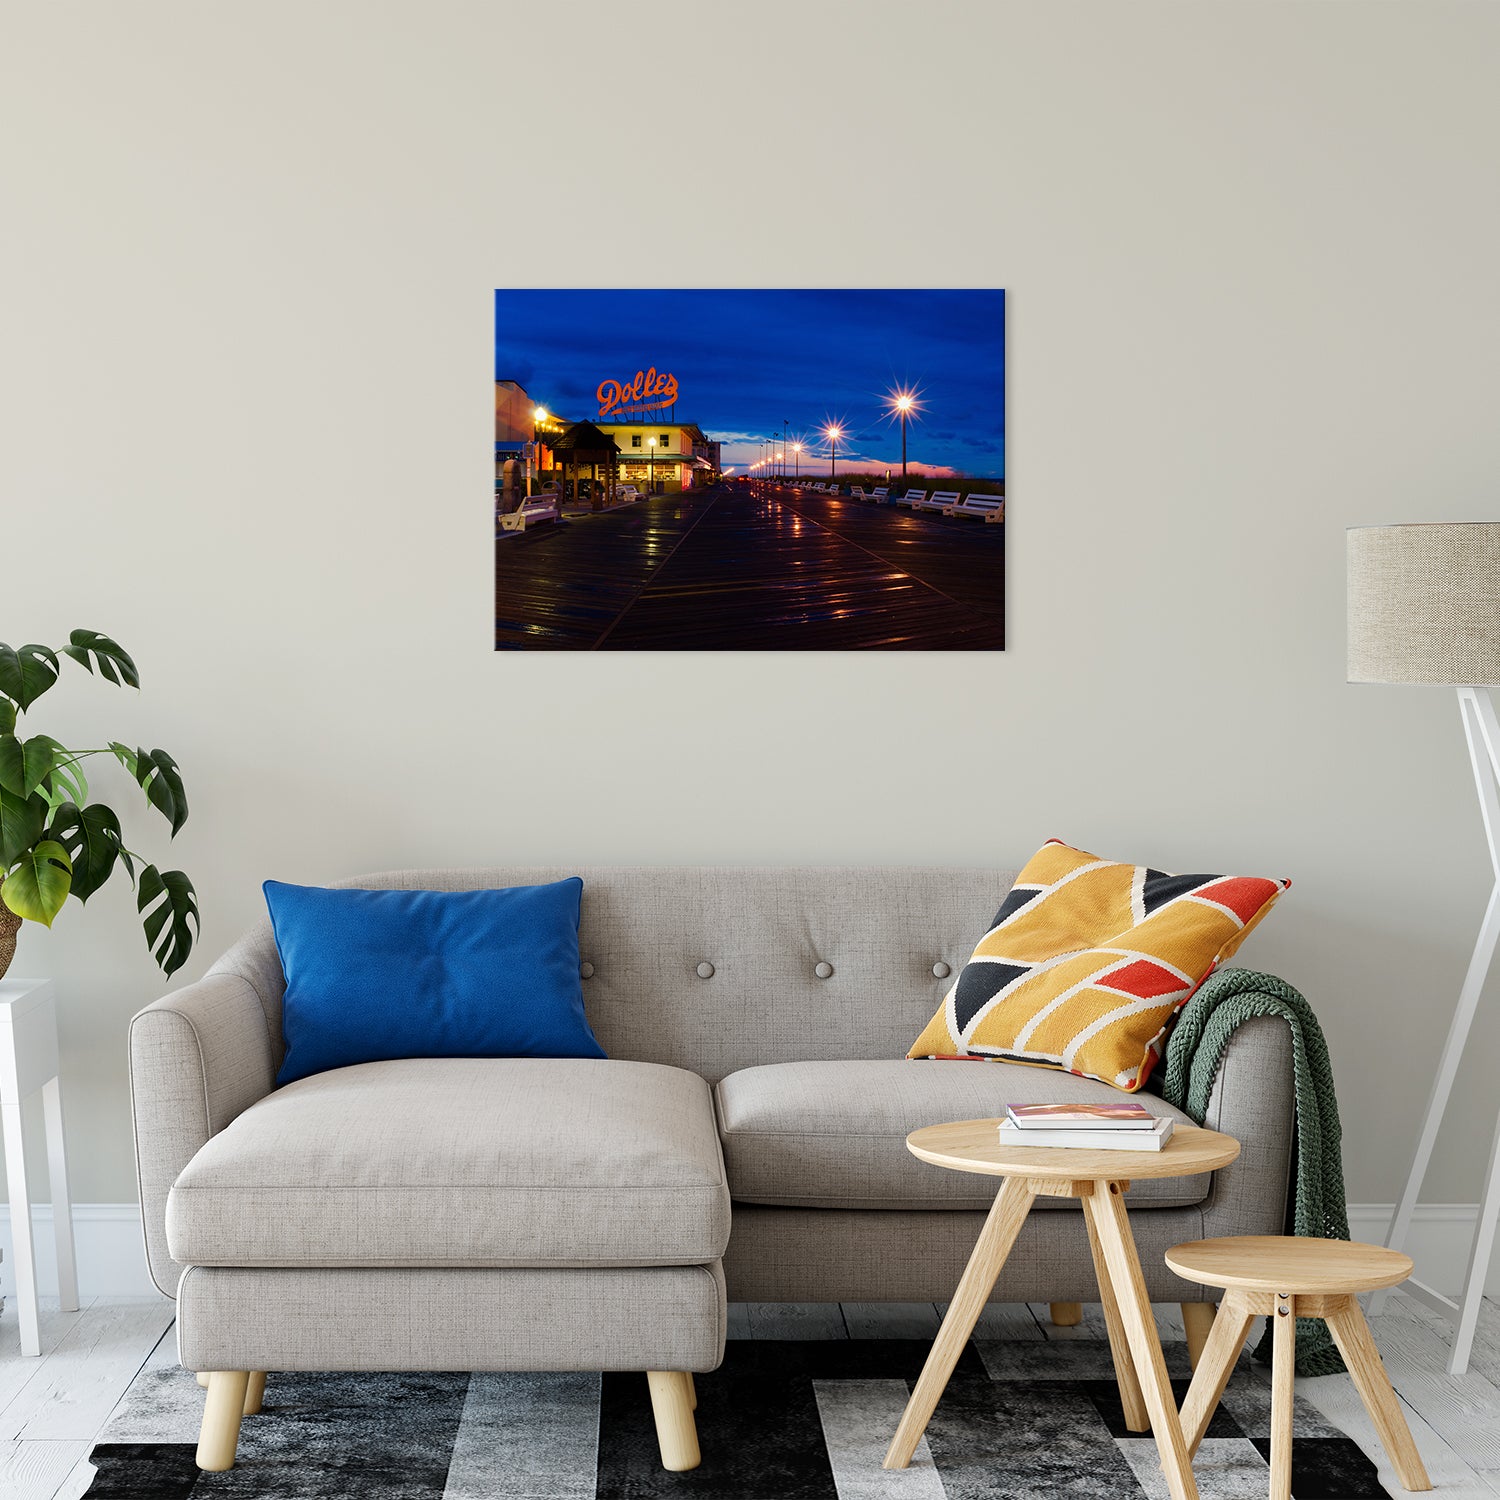 Early Morning at Dolles Night Photo Fine Art Canvas Wall Art Prints 24" x 36" / Fine Art Canvas - PIPAFINEART